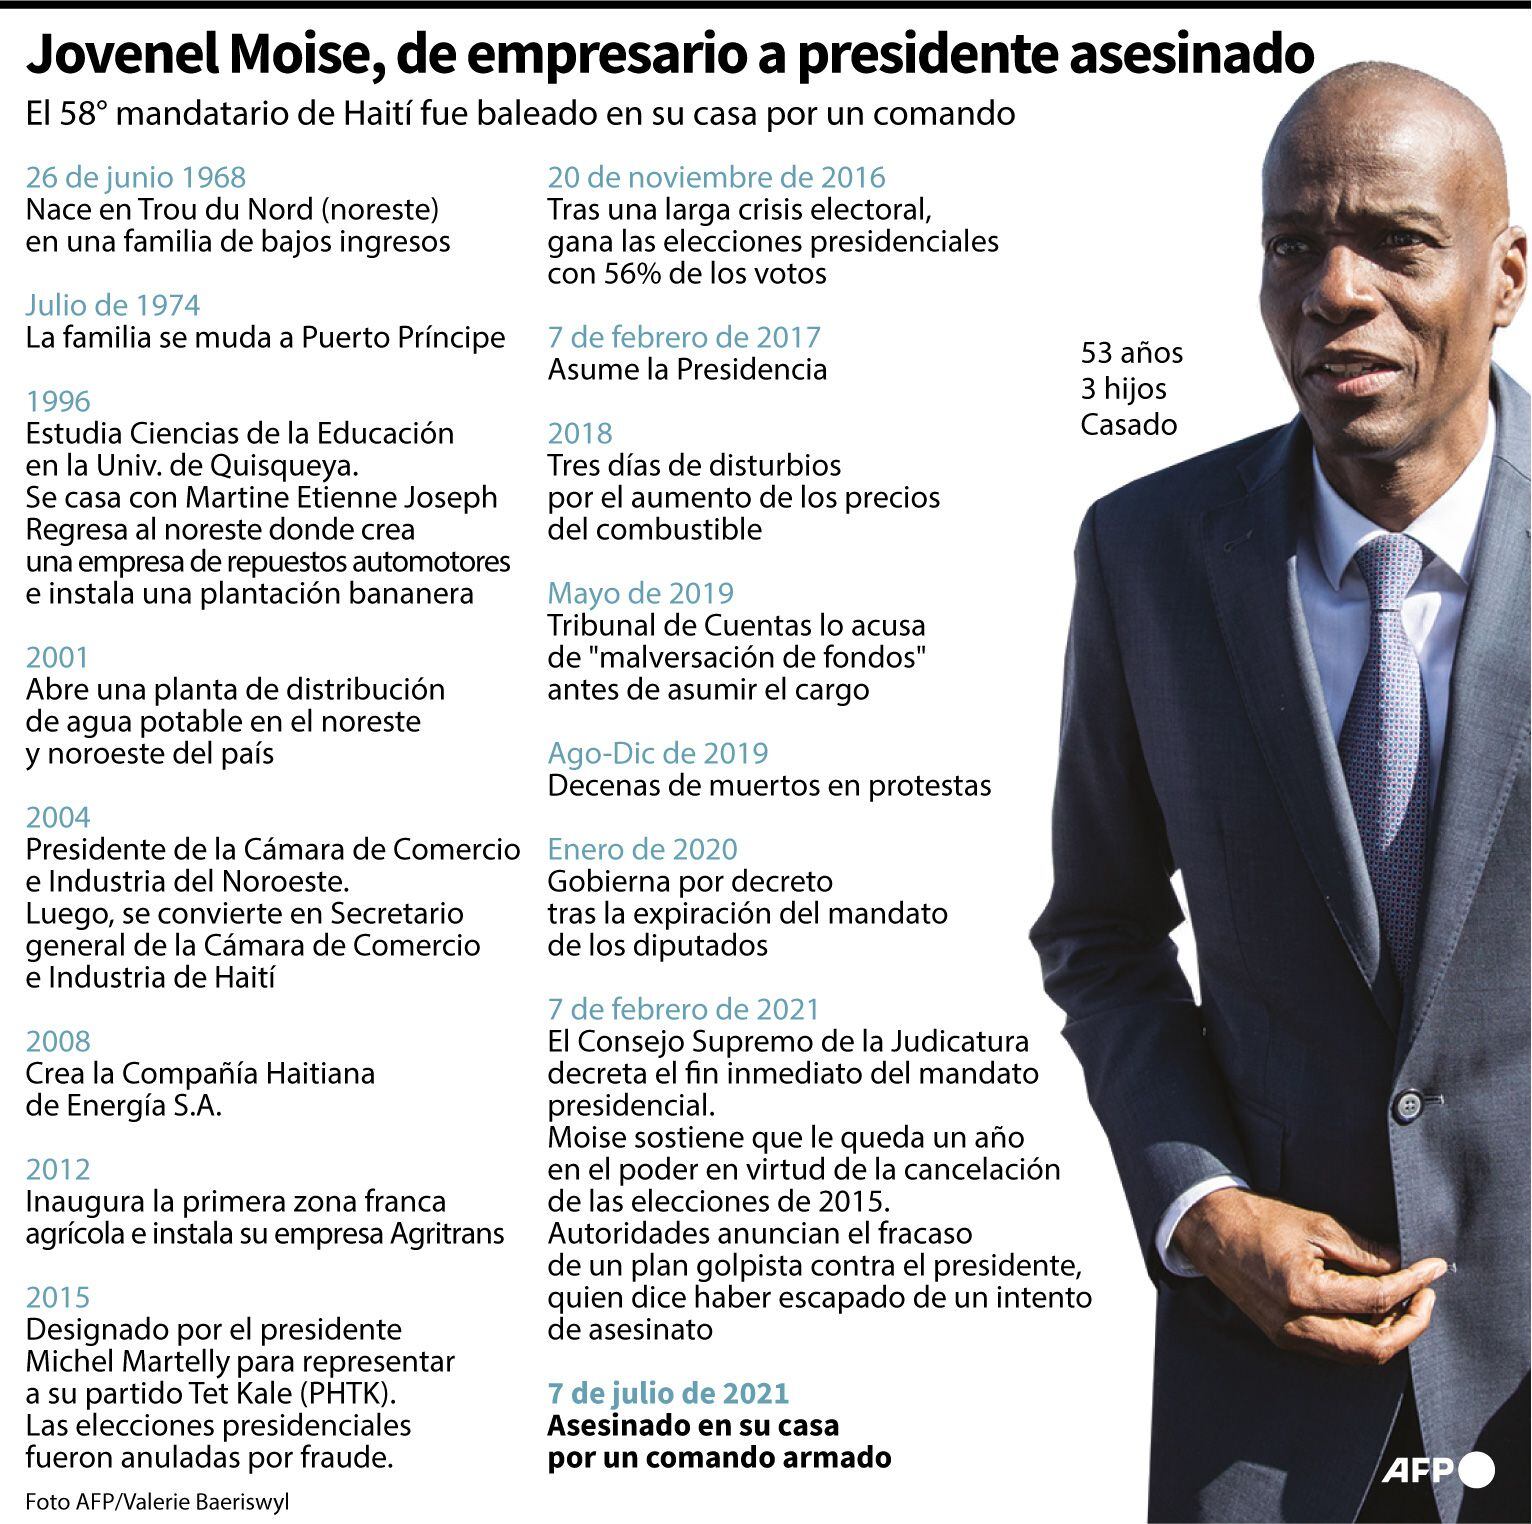 The life of Jovenel Moïse.  (AFP).